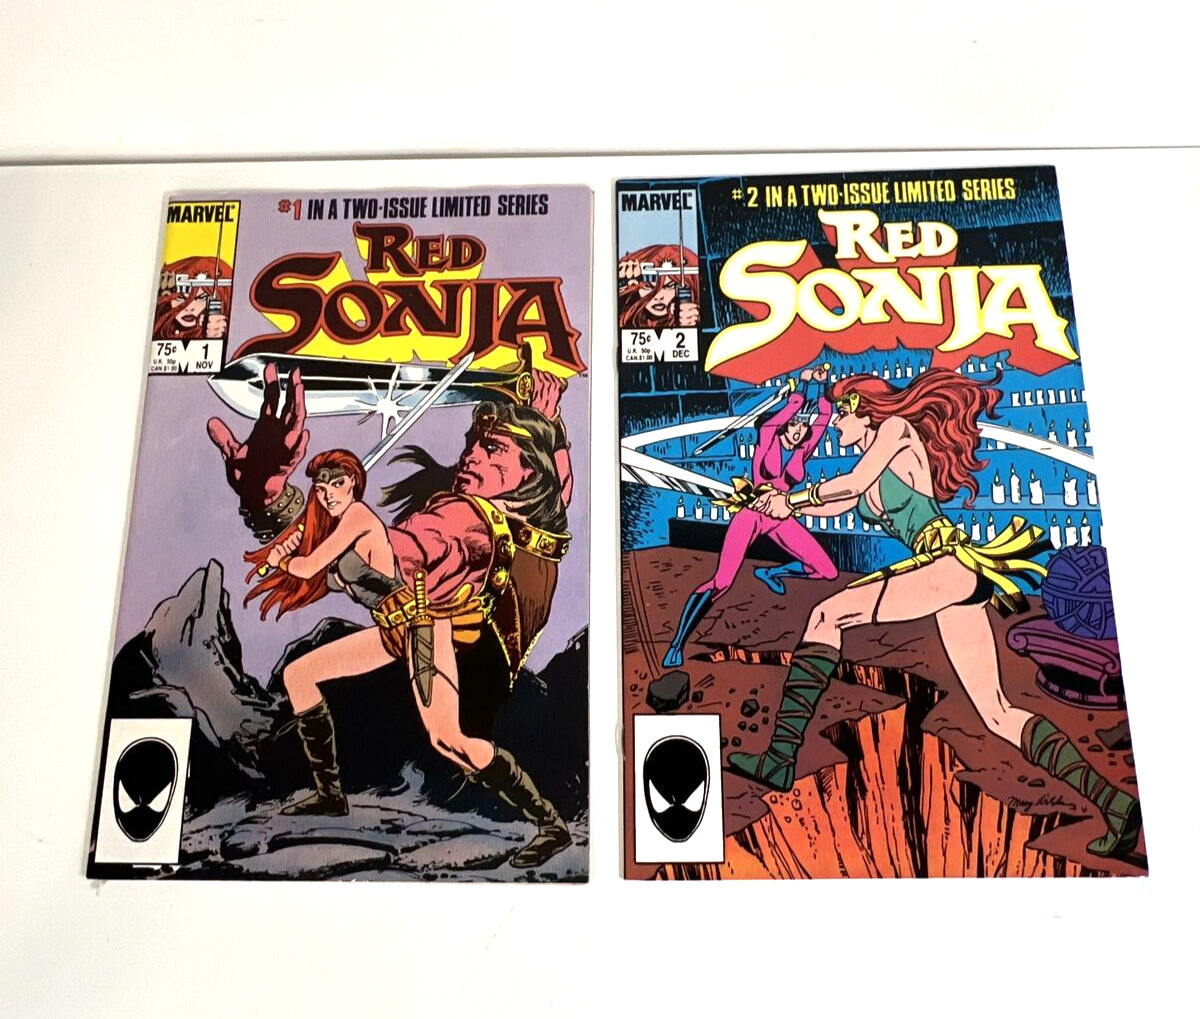 Marvel RED SONJA #1 & #2 The Movie (SCHWARZENEGGER) Complete Limited Series